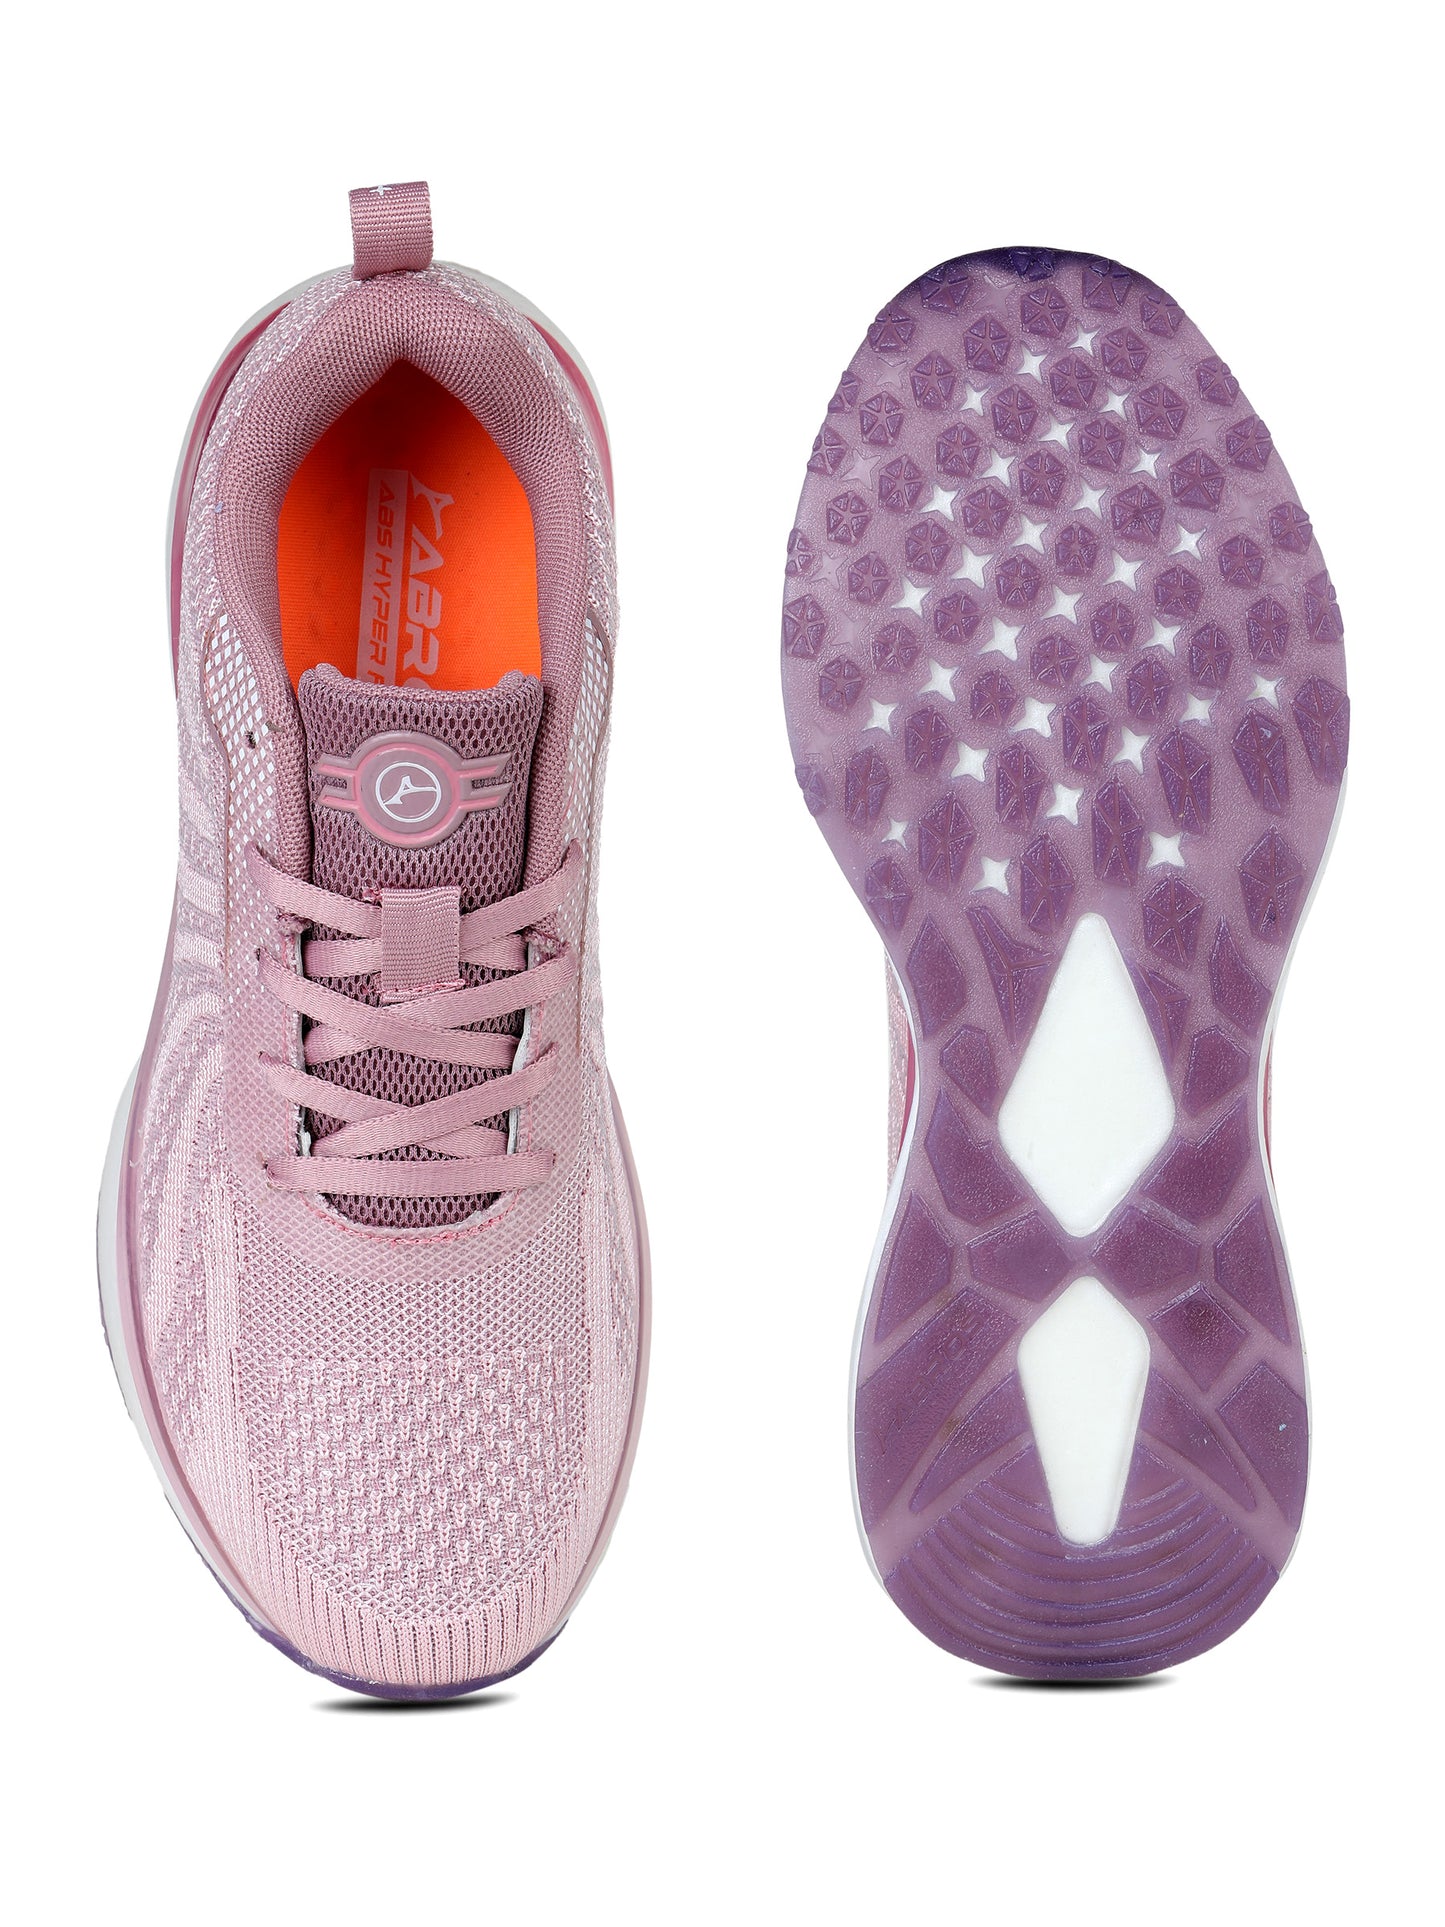 ABROS DYNA SPORTS SHOES FOR WOMEN